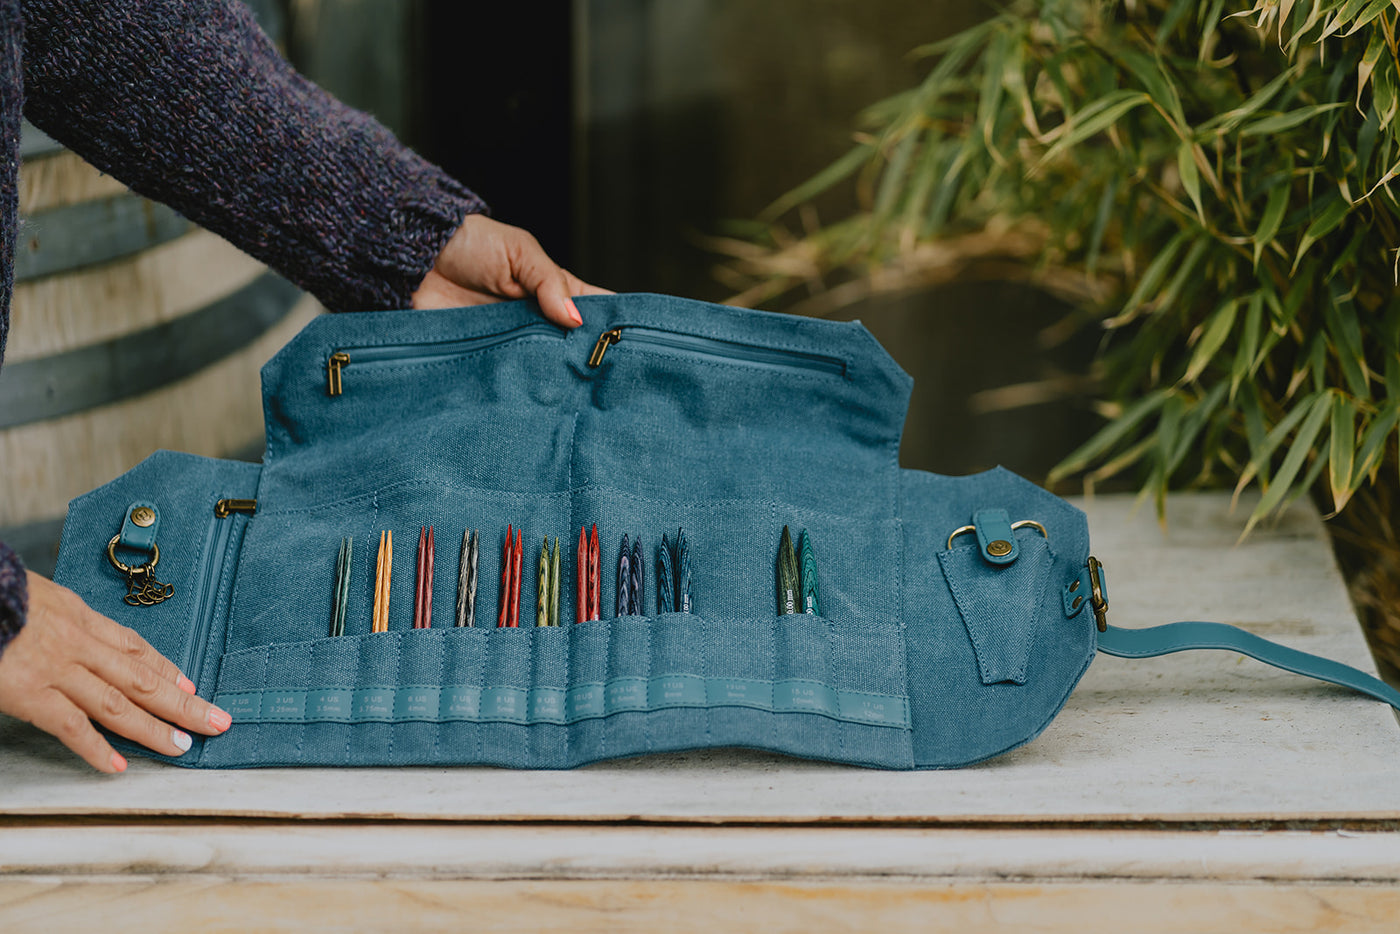 Maker's Canvas Needle Case | Teal